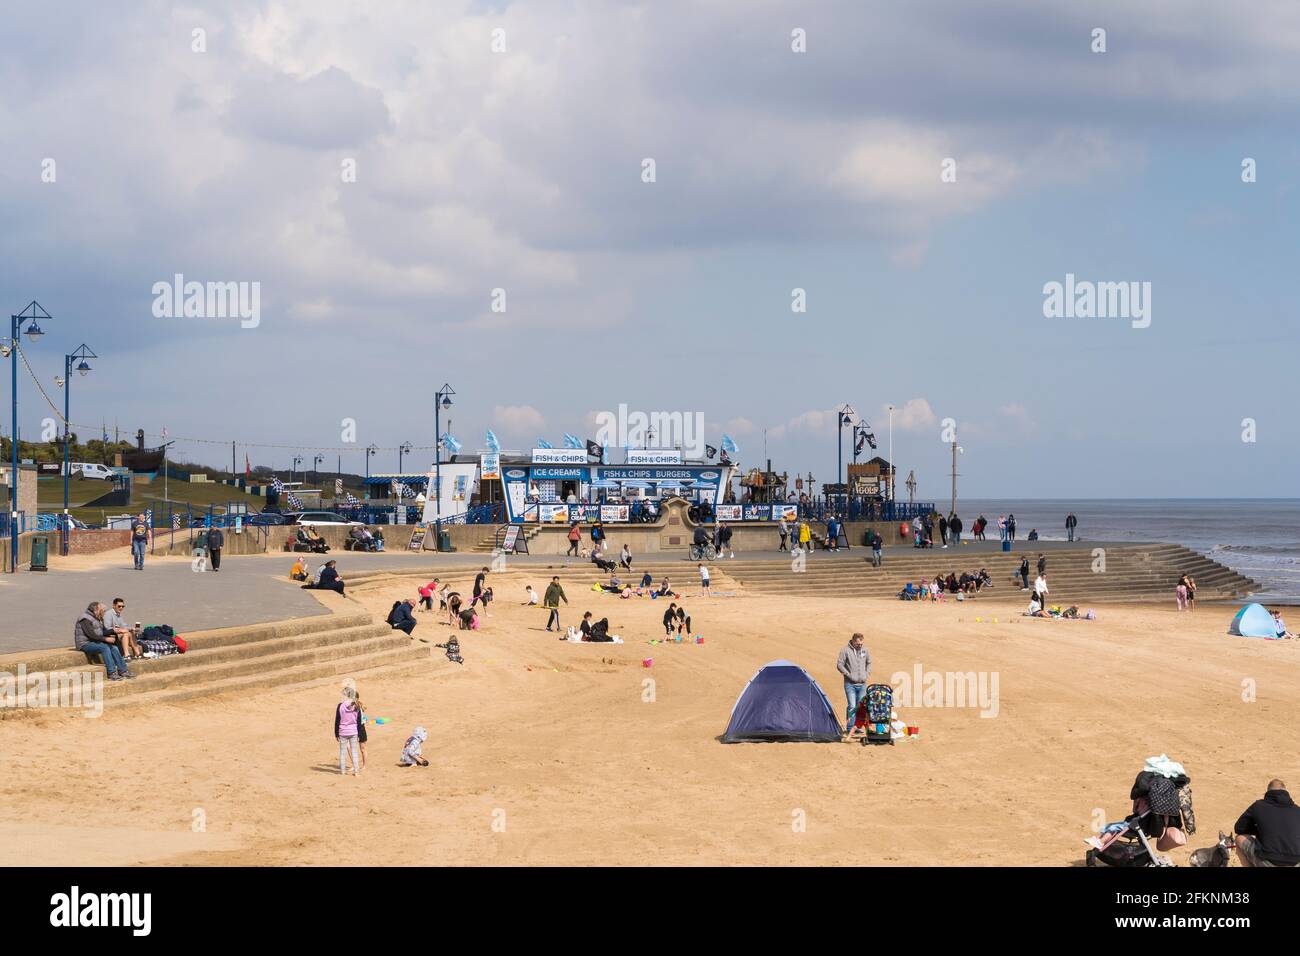 people enjoying outing after covid restrictions eased Mablethorpe beach Lincolnshire Stock Photo